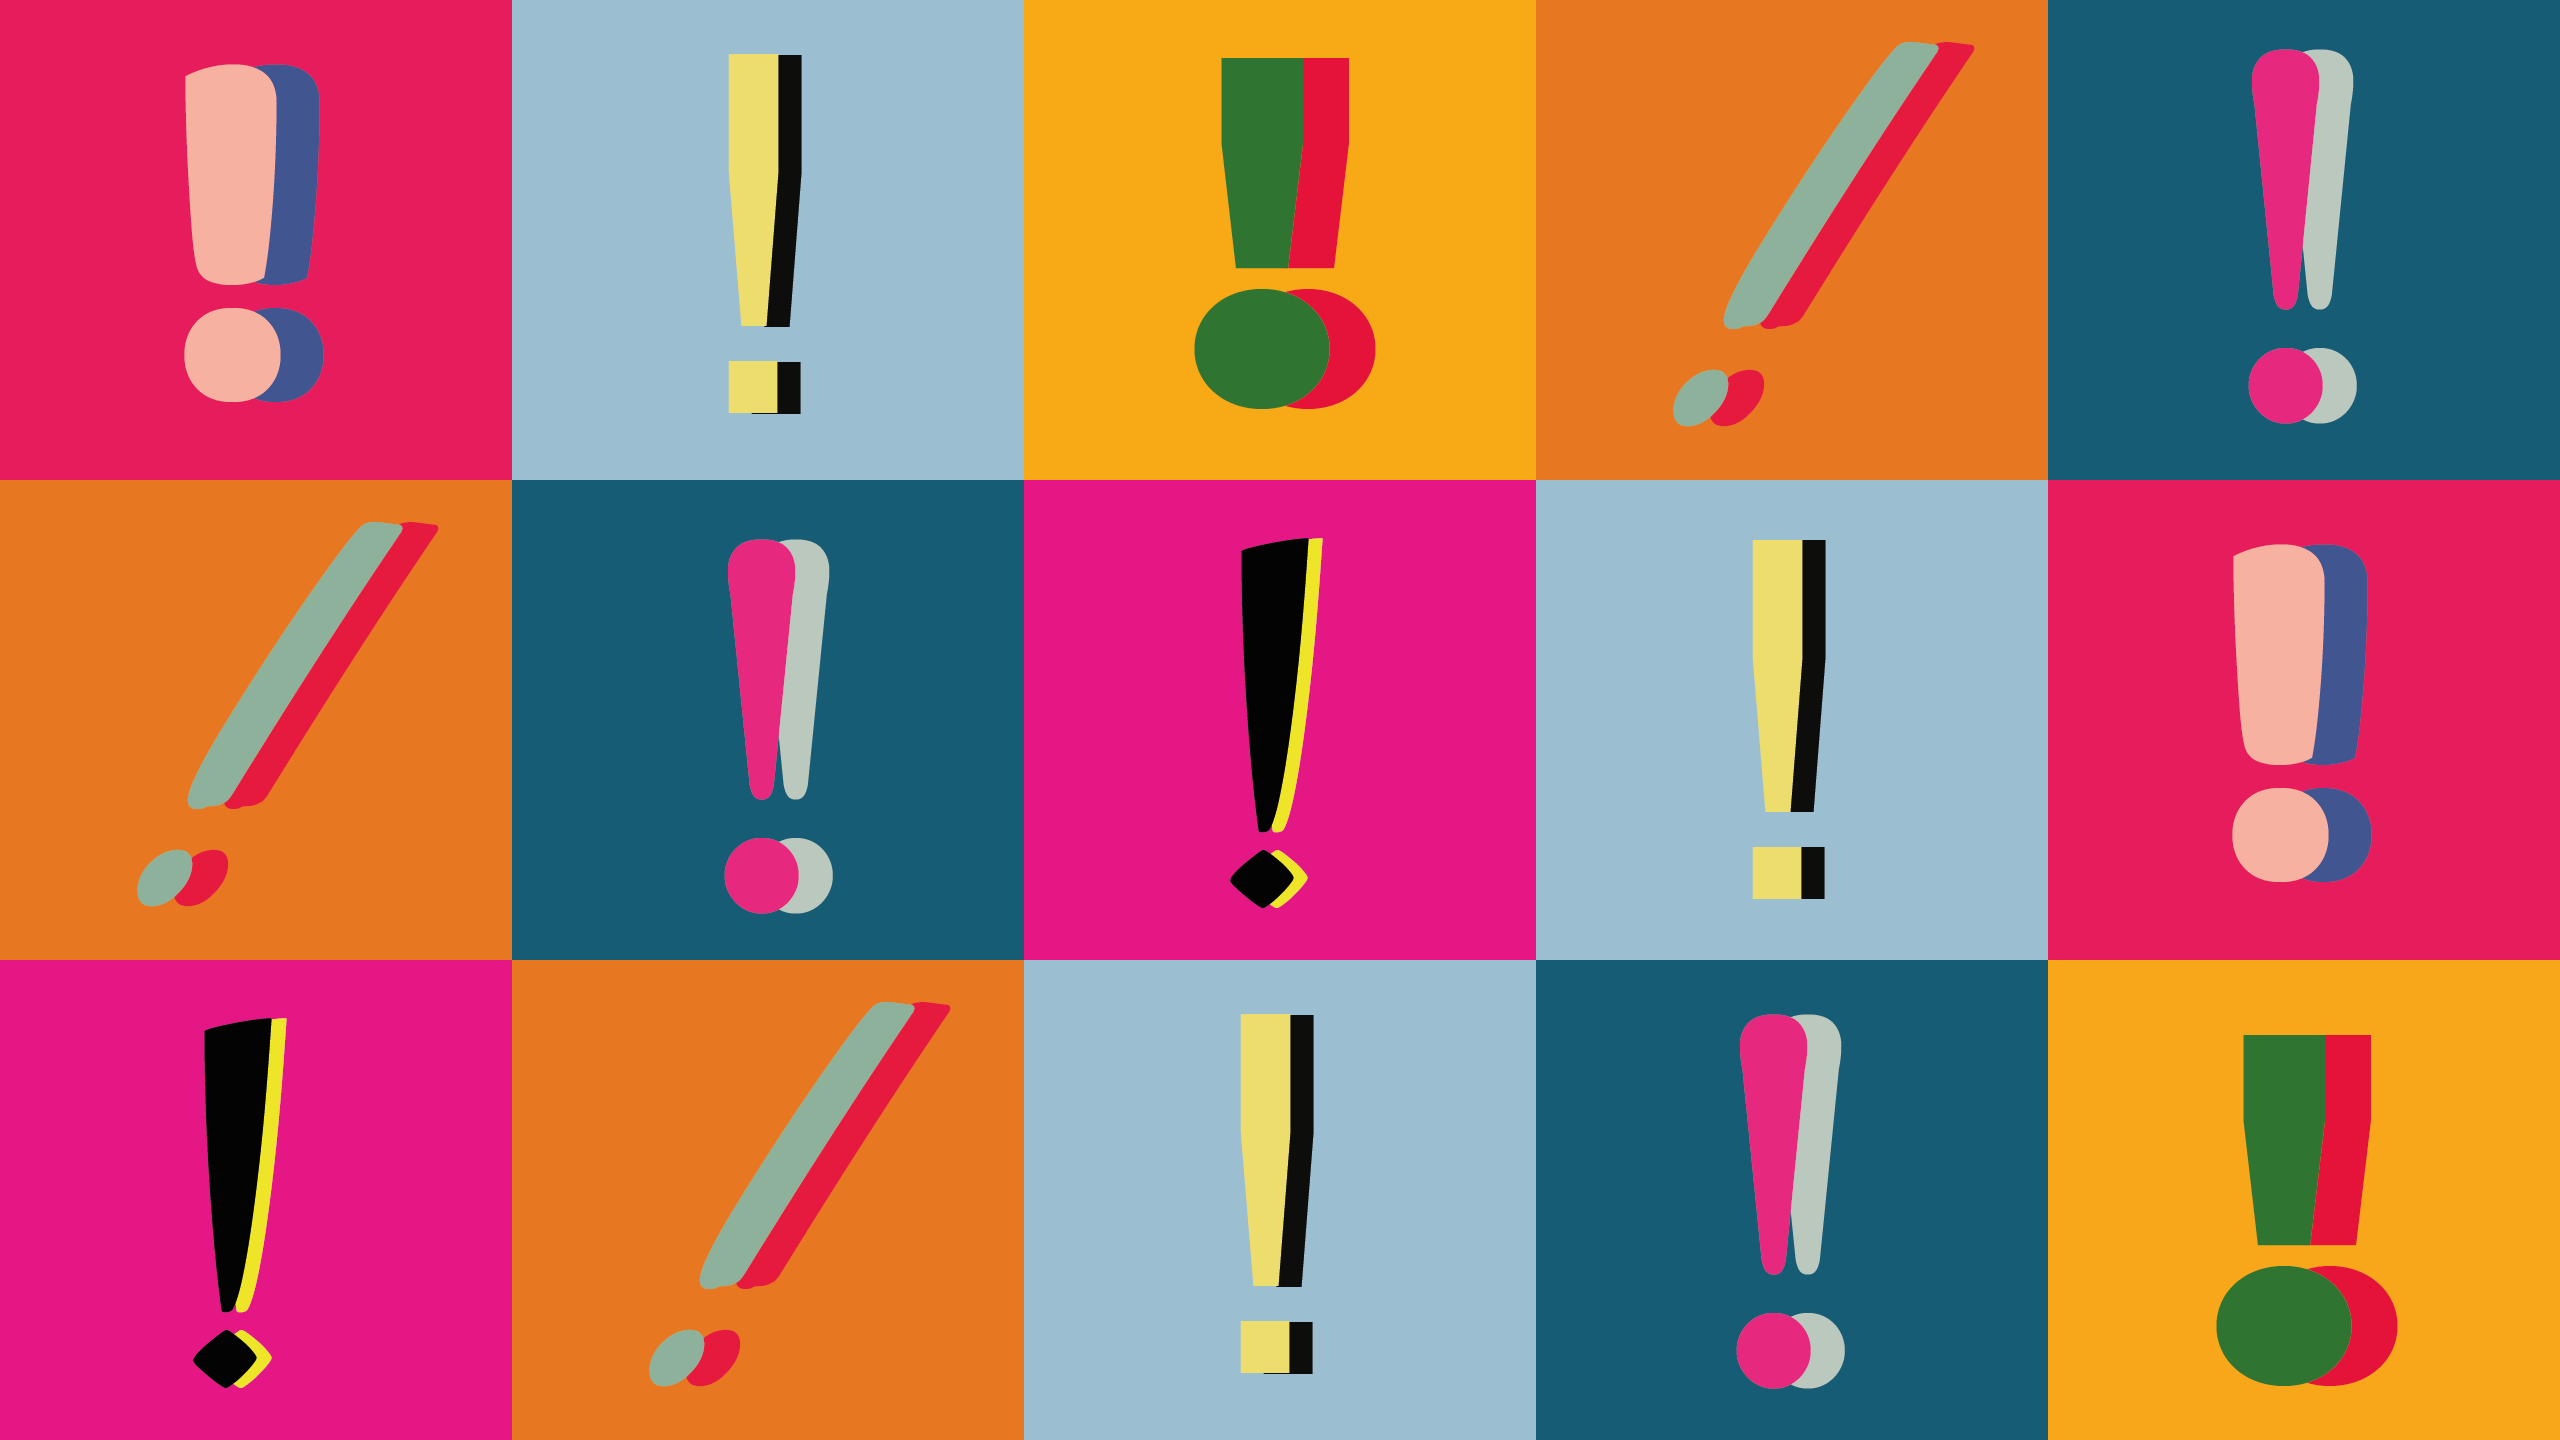 A collage of colourful exclamation marks.